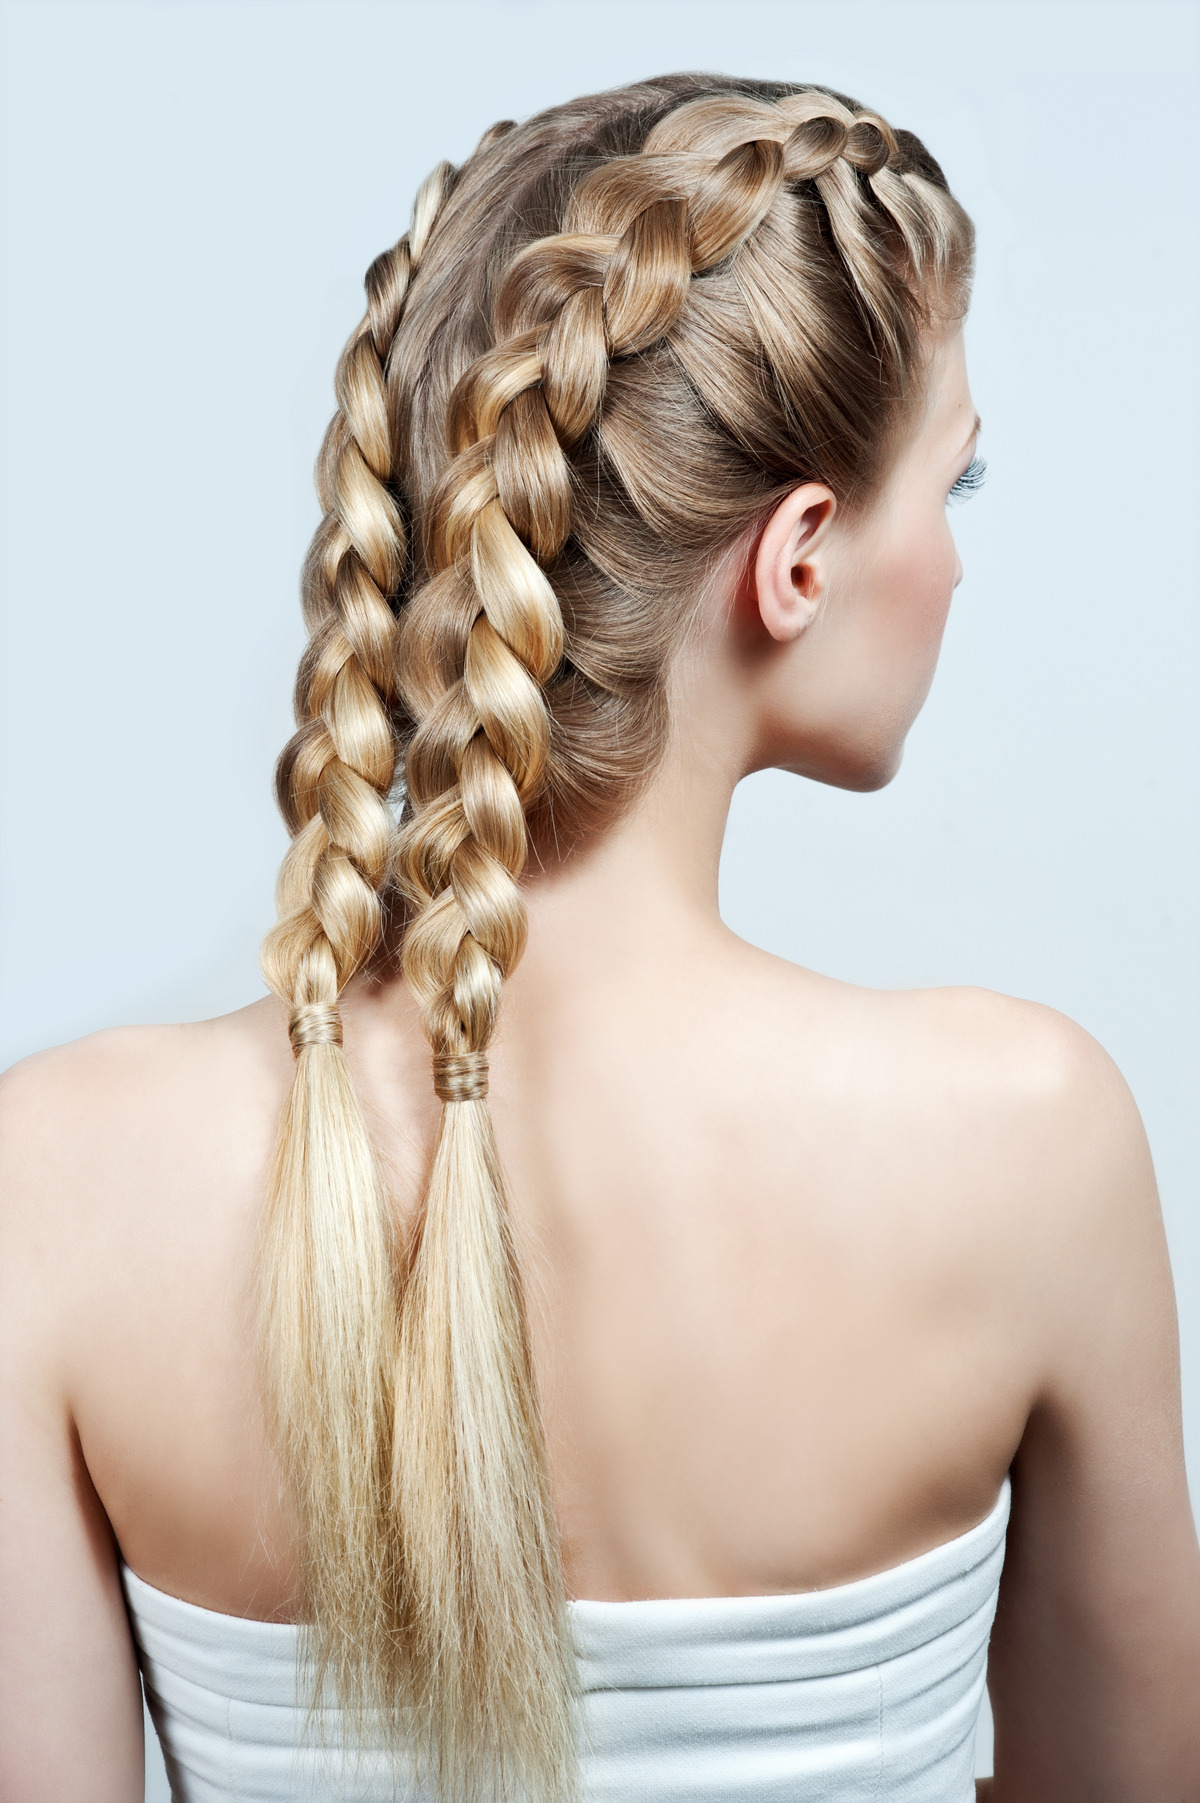 Blond woman with a braid hairstyle